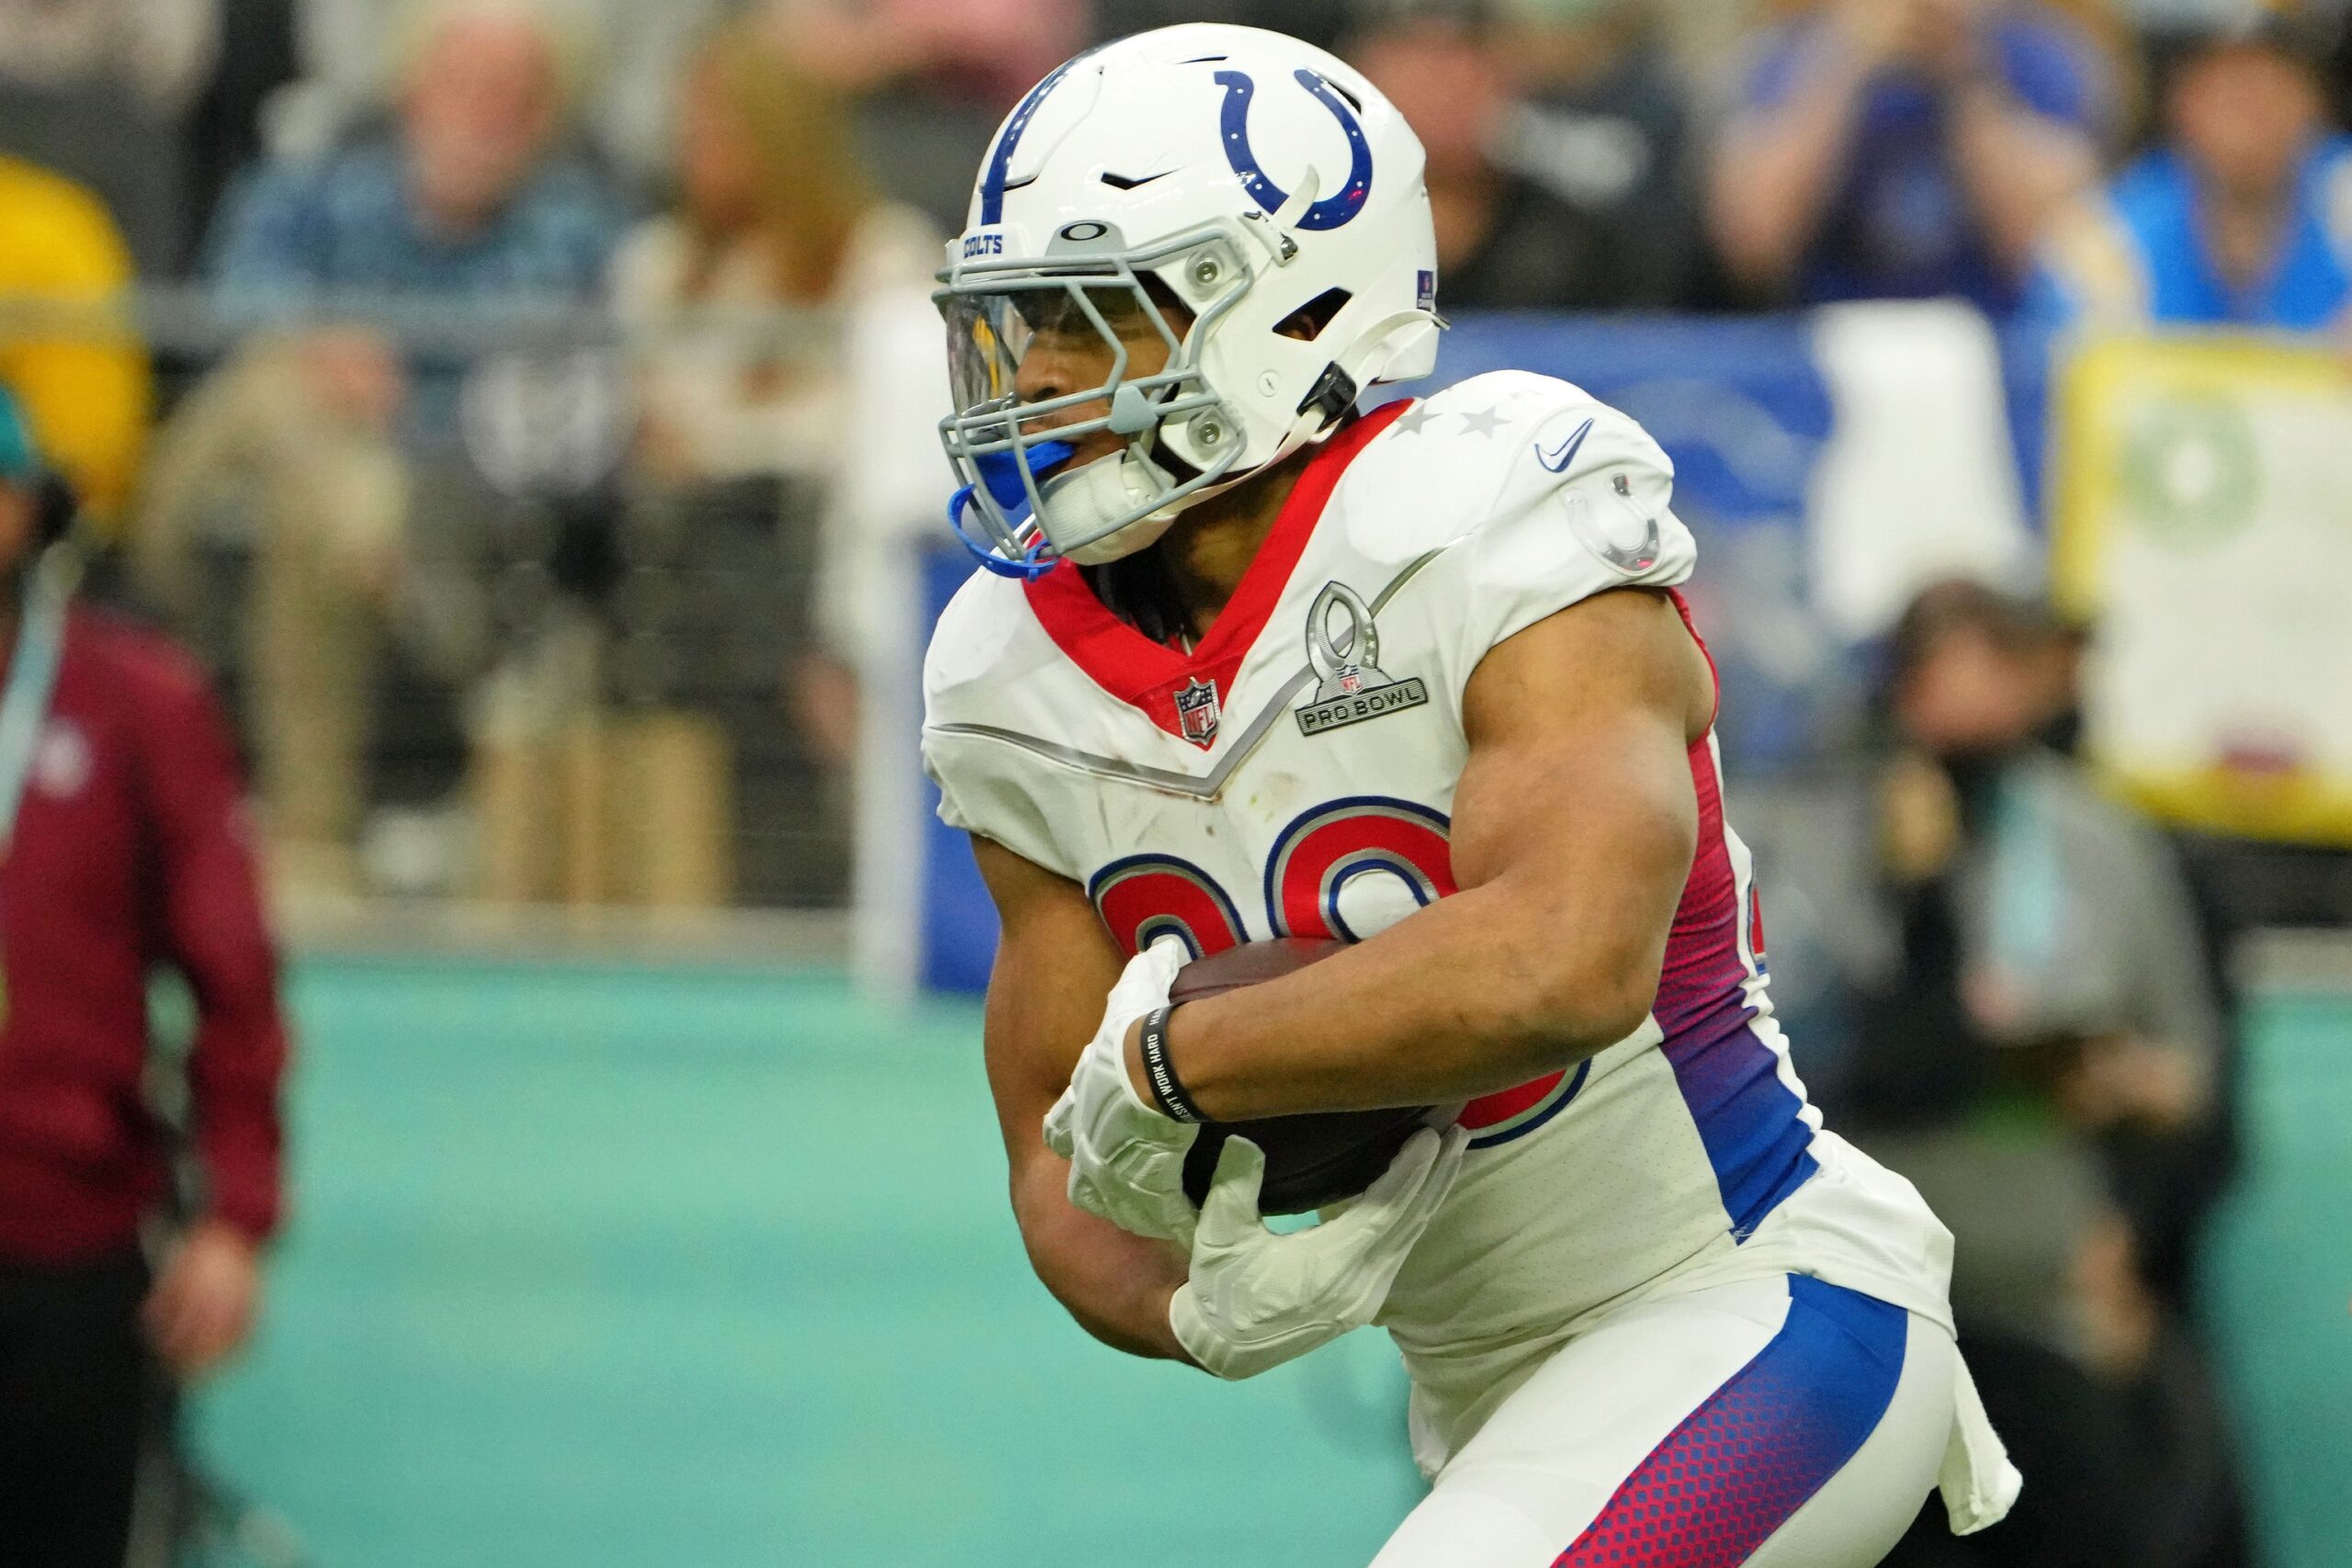 Evan Hull fantasy advice: Start or sit the Colts RB in Week 1